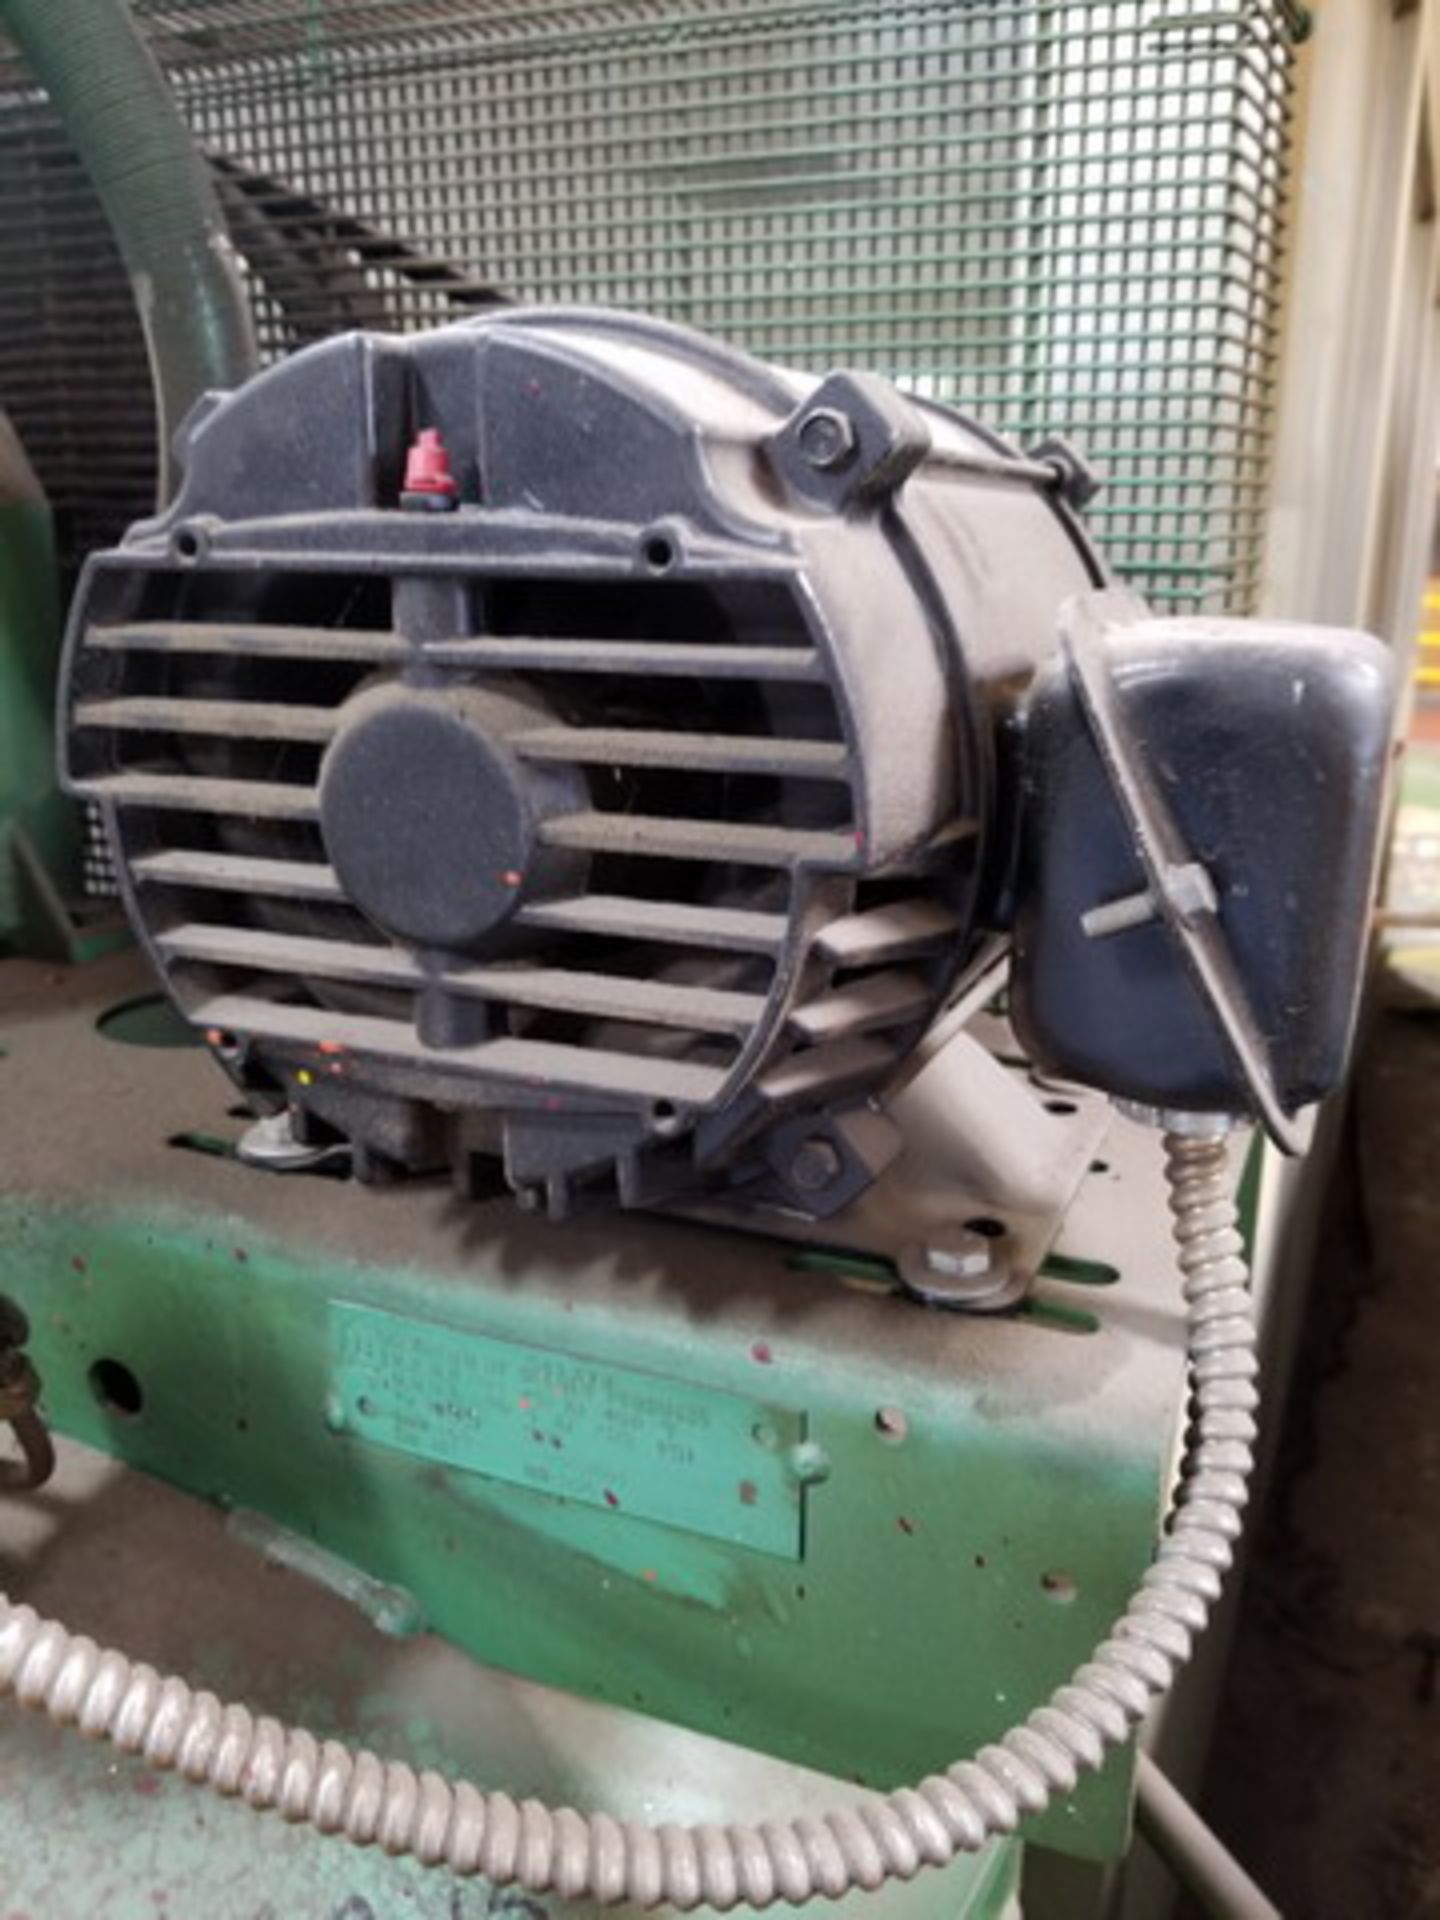 1995 Speedaire Model 5F5652 Air Compressor. S/N: 051095L-827246. MAWP: 200 PSI At 450F; 7.5HP; - Image 4 of 5